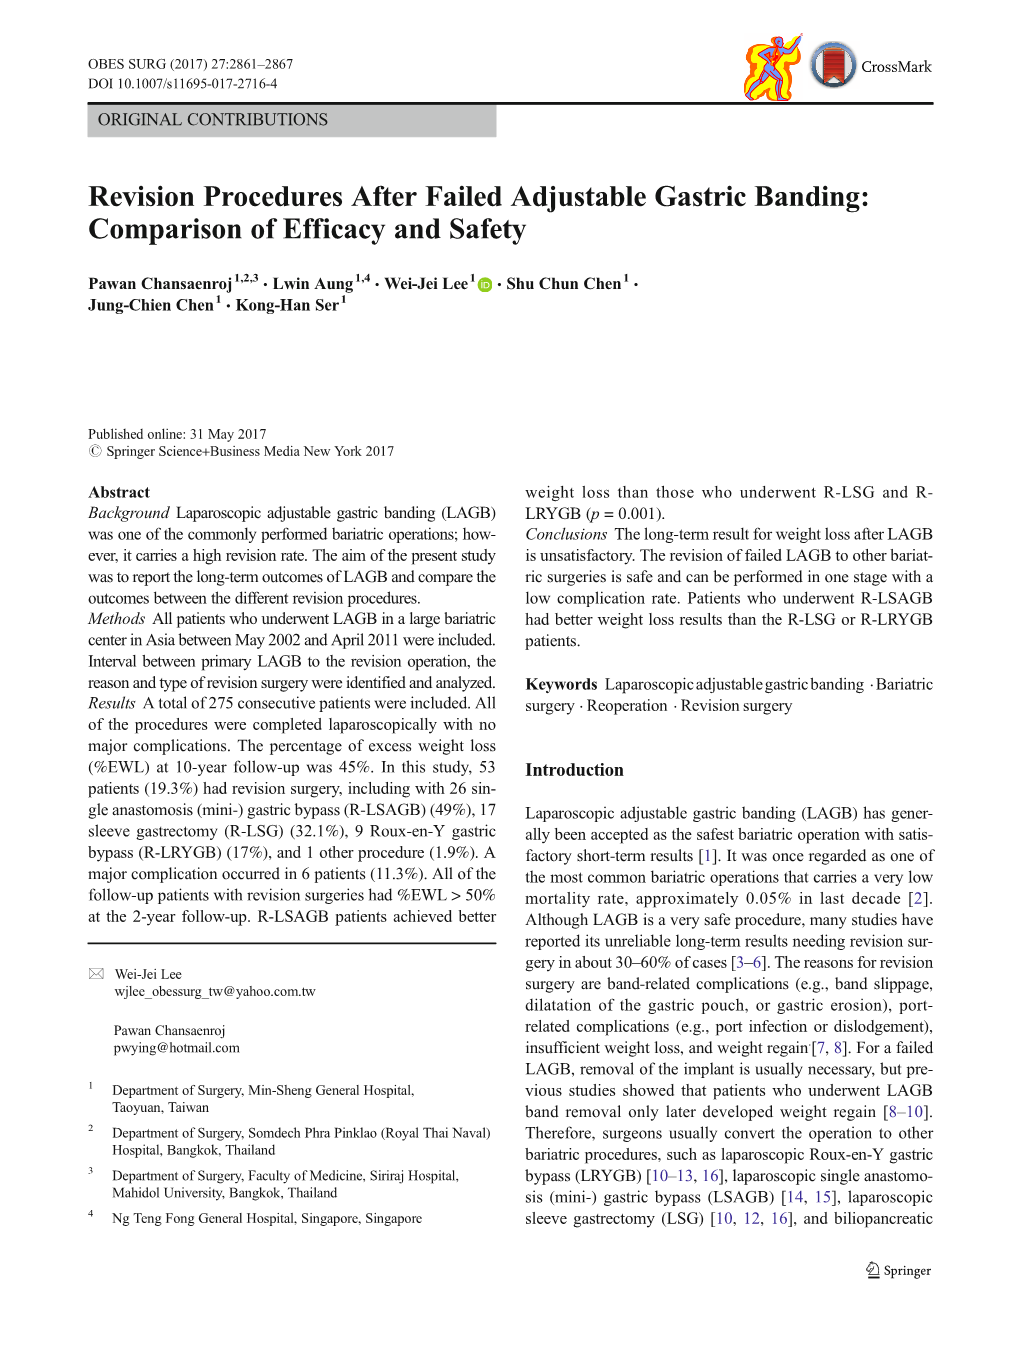 Revision Procedures After Failed Adjustable Gastric Banding: Comparison of Efficacy and Safety